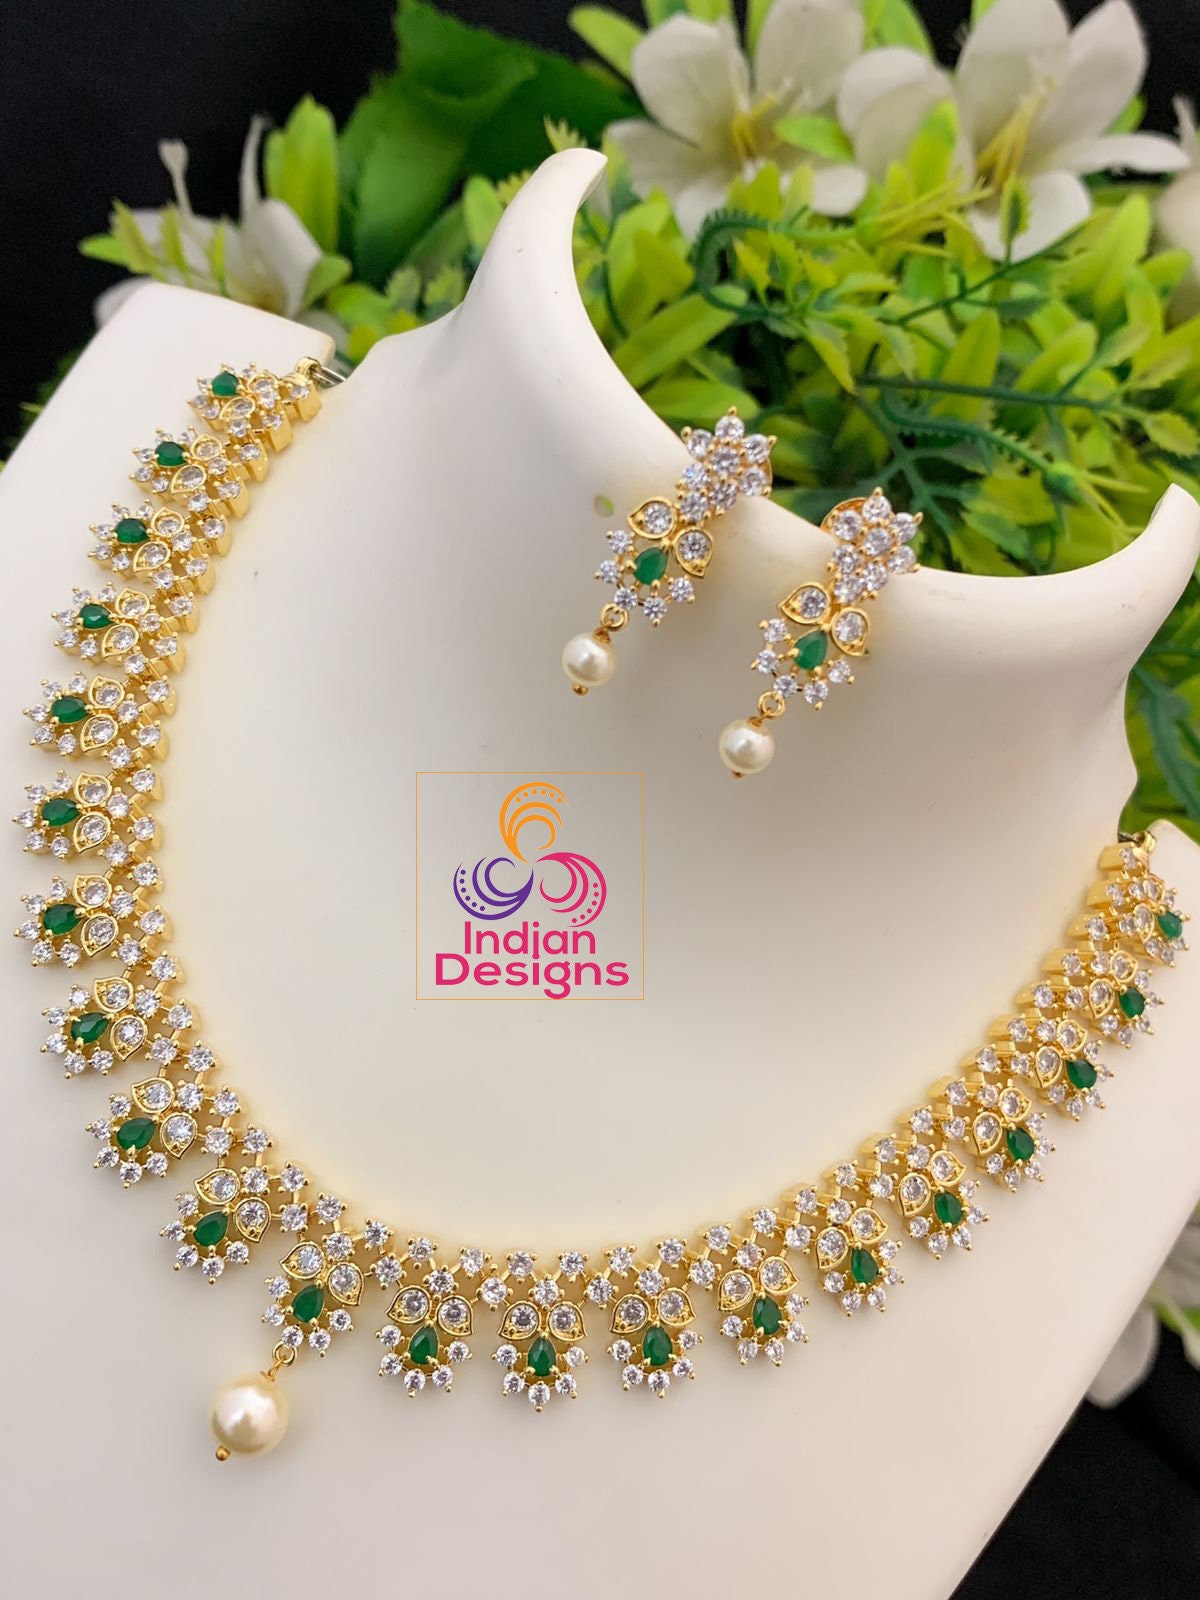 South Indian CZ Necklace jewelry design | American diamond choker necklace set | Gold tone emerald necklace | Ruby stone flower necklace